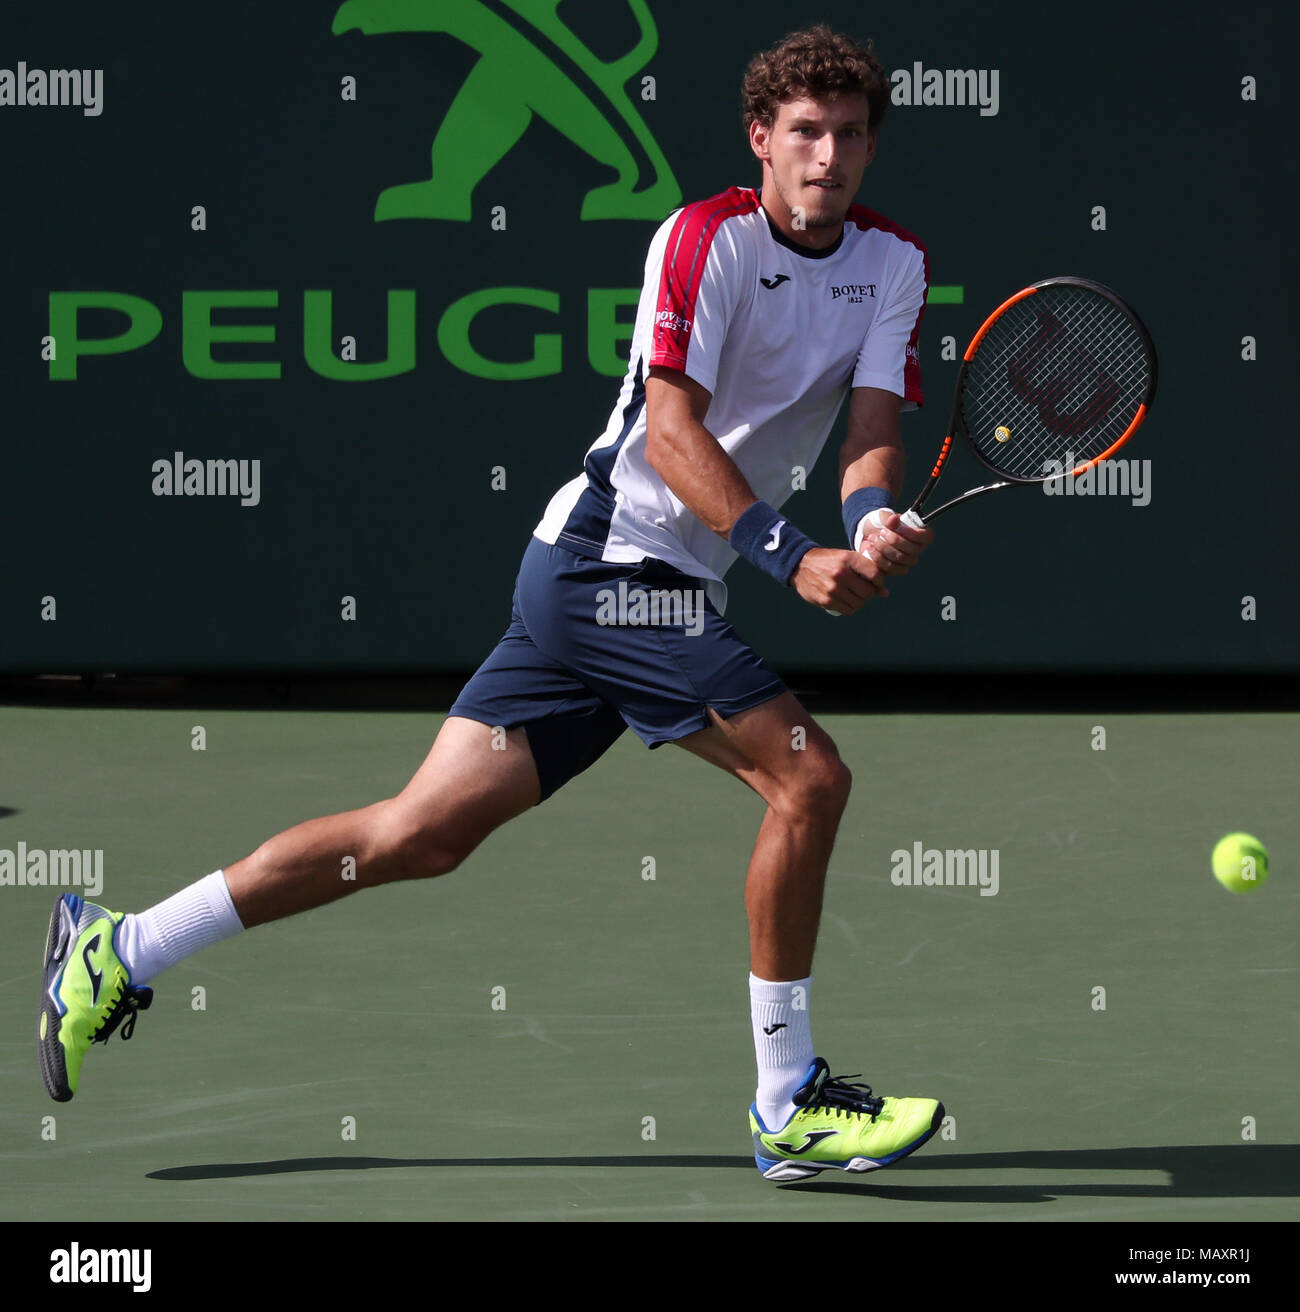 Key Biscayne, Florida, USA. 27th Mar, 2018. Pablo Carreno Busta of Spain plays a backhand against Fernando Verdasco of Spain during a fourth round match of the 2018 Miami Open presented by Itau professional tennis tournament, played at the Crandon Park Tennis Center in Key Biscayne, Florida, USA. Mario Houben/CSM/Alamy Live News Stock Photo